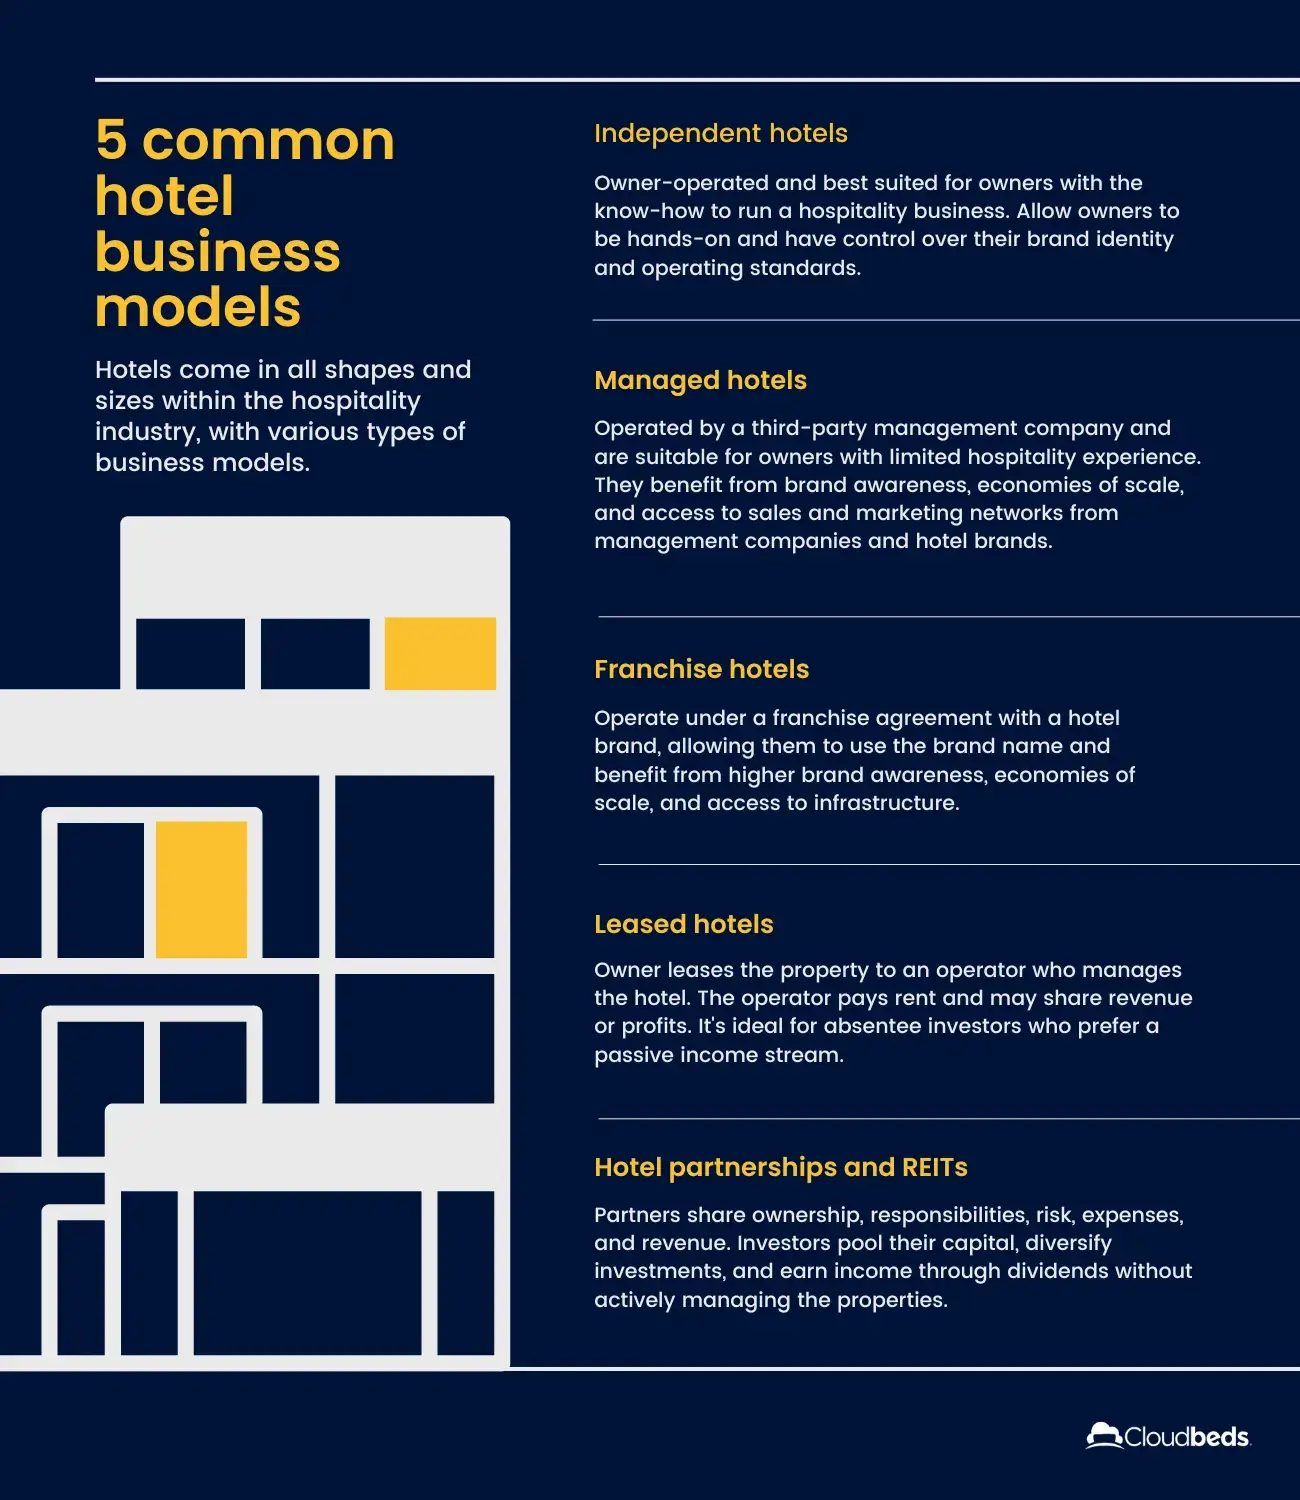 5 common hotel business models